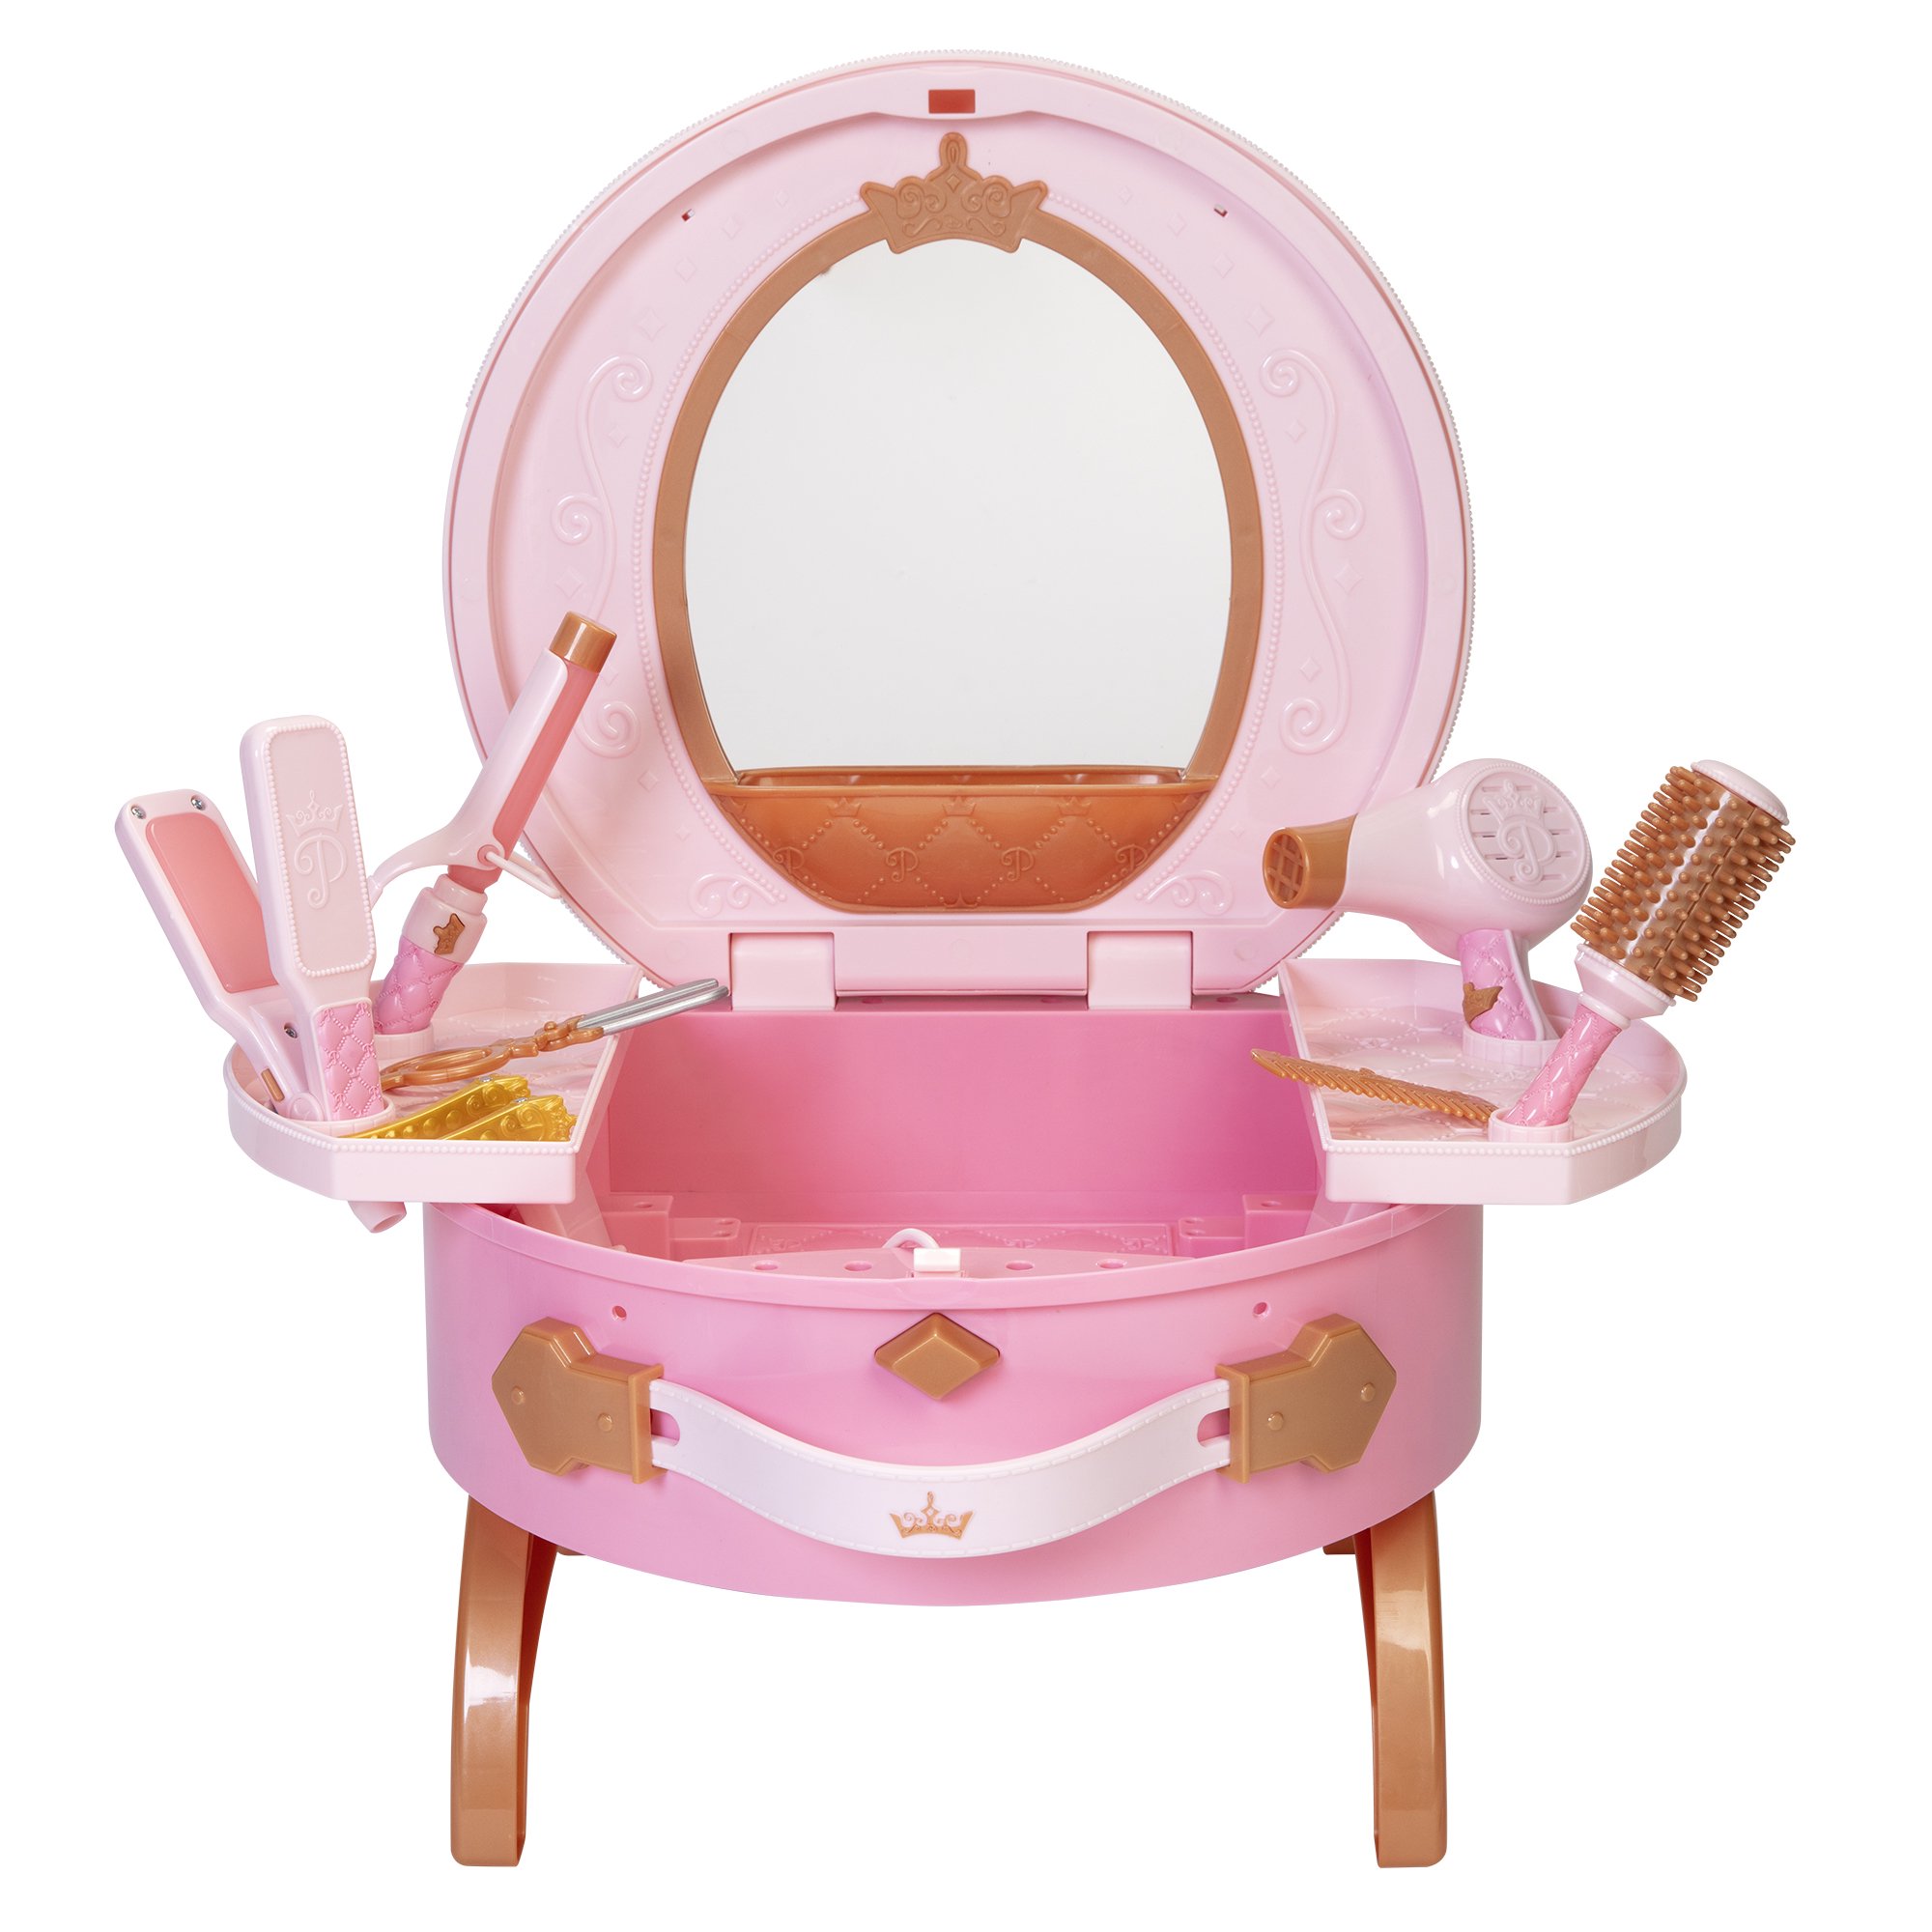 Disney Princess Style Collection Light Up & Style Vanity Toy w/ Accessories $26.24 + Free Store Pickup at Walmart, FS w/ Walmart+ or FS on $35+